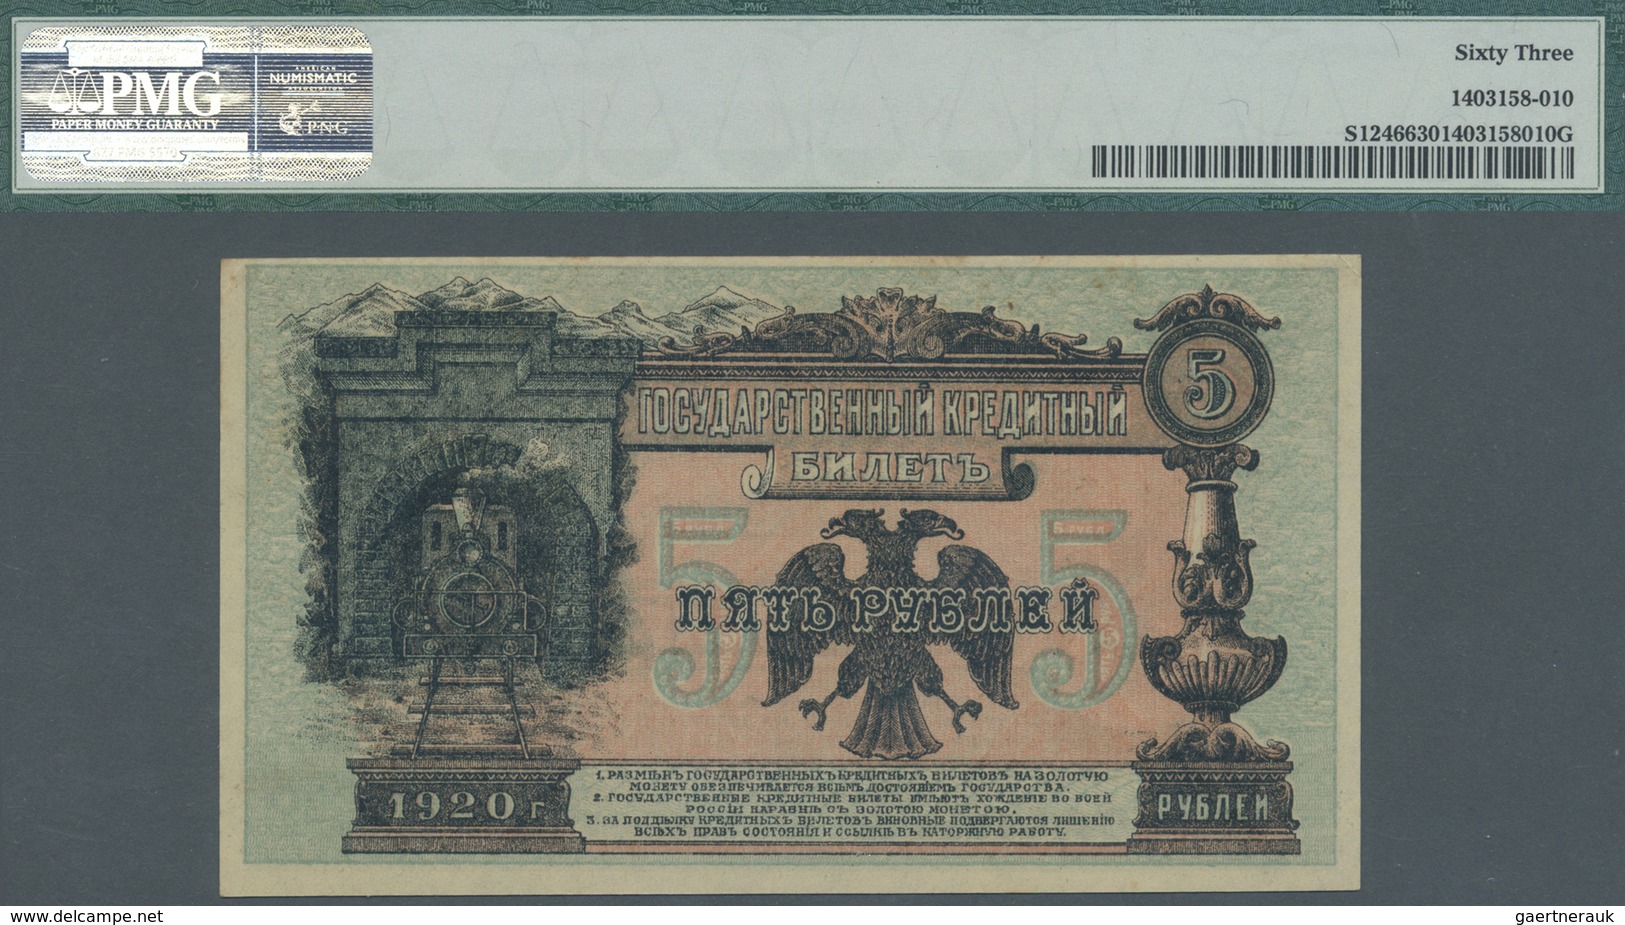 Russia / Russland: Far East Provisional Government 5 Rubles 1920 P. S1246, Condition: PMG Graded 63 - Russia